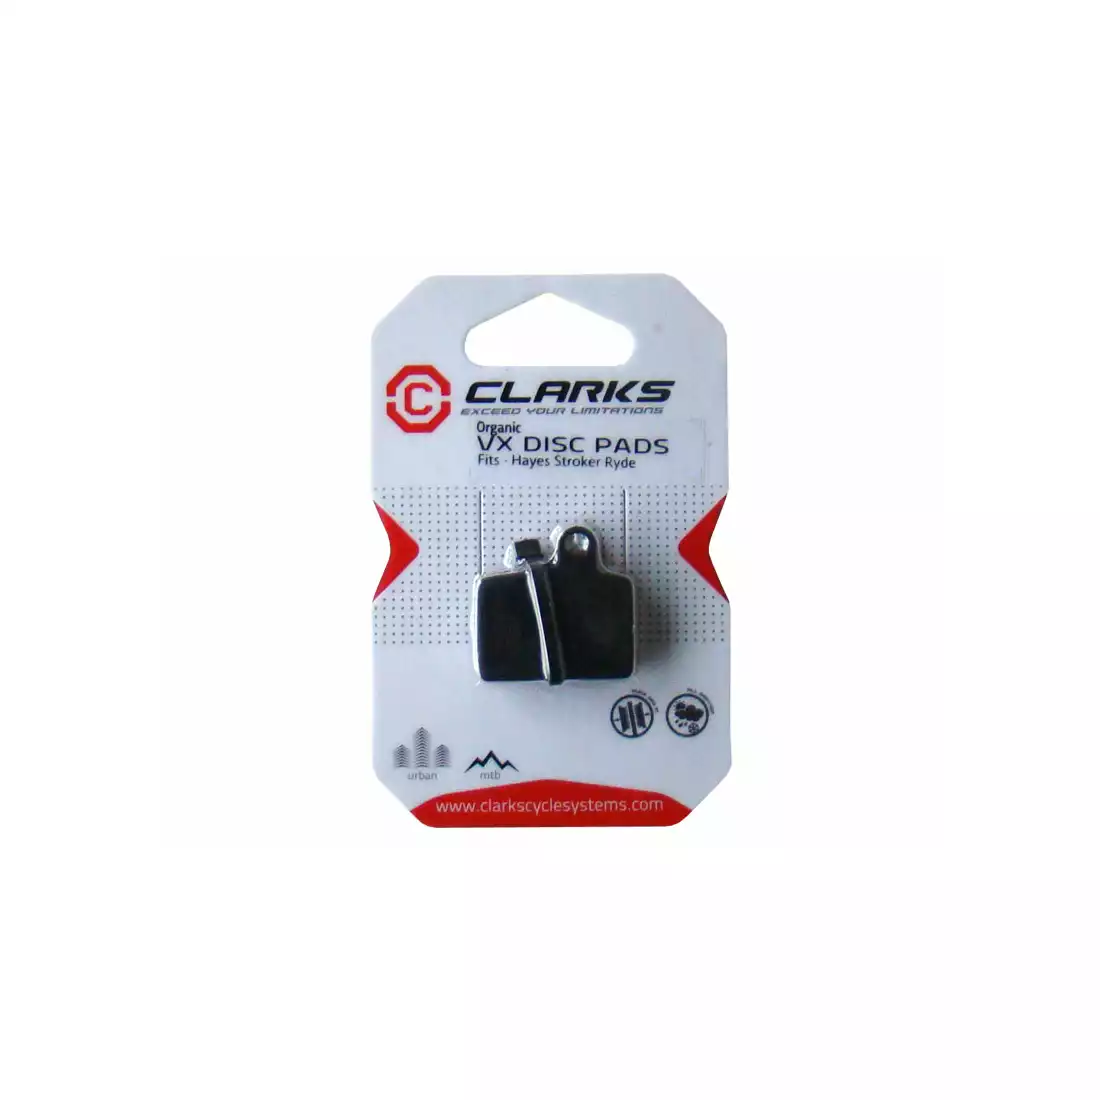 CLARKS brake pads for disc brakes HAYES (Hayes Stroker Ryde - Dyno), organic